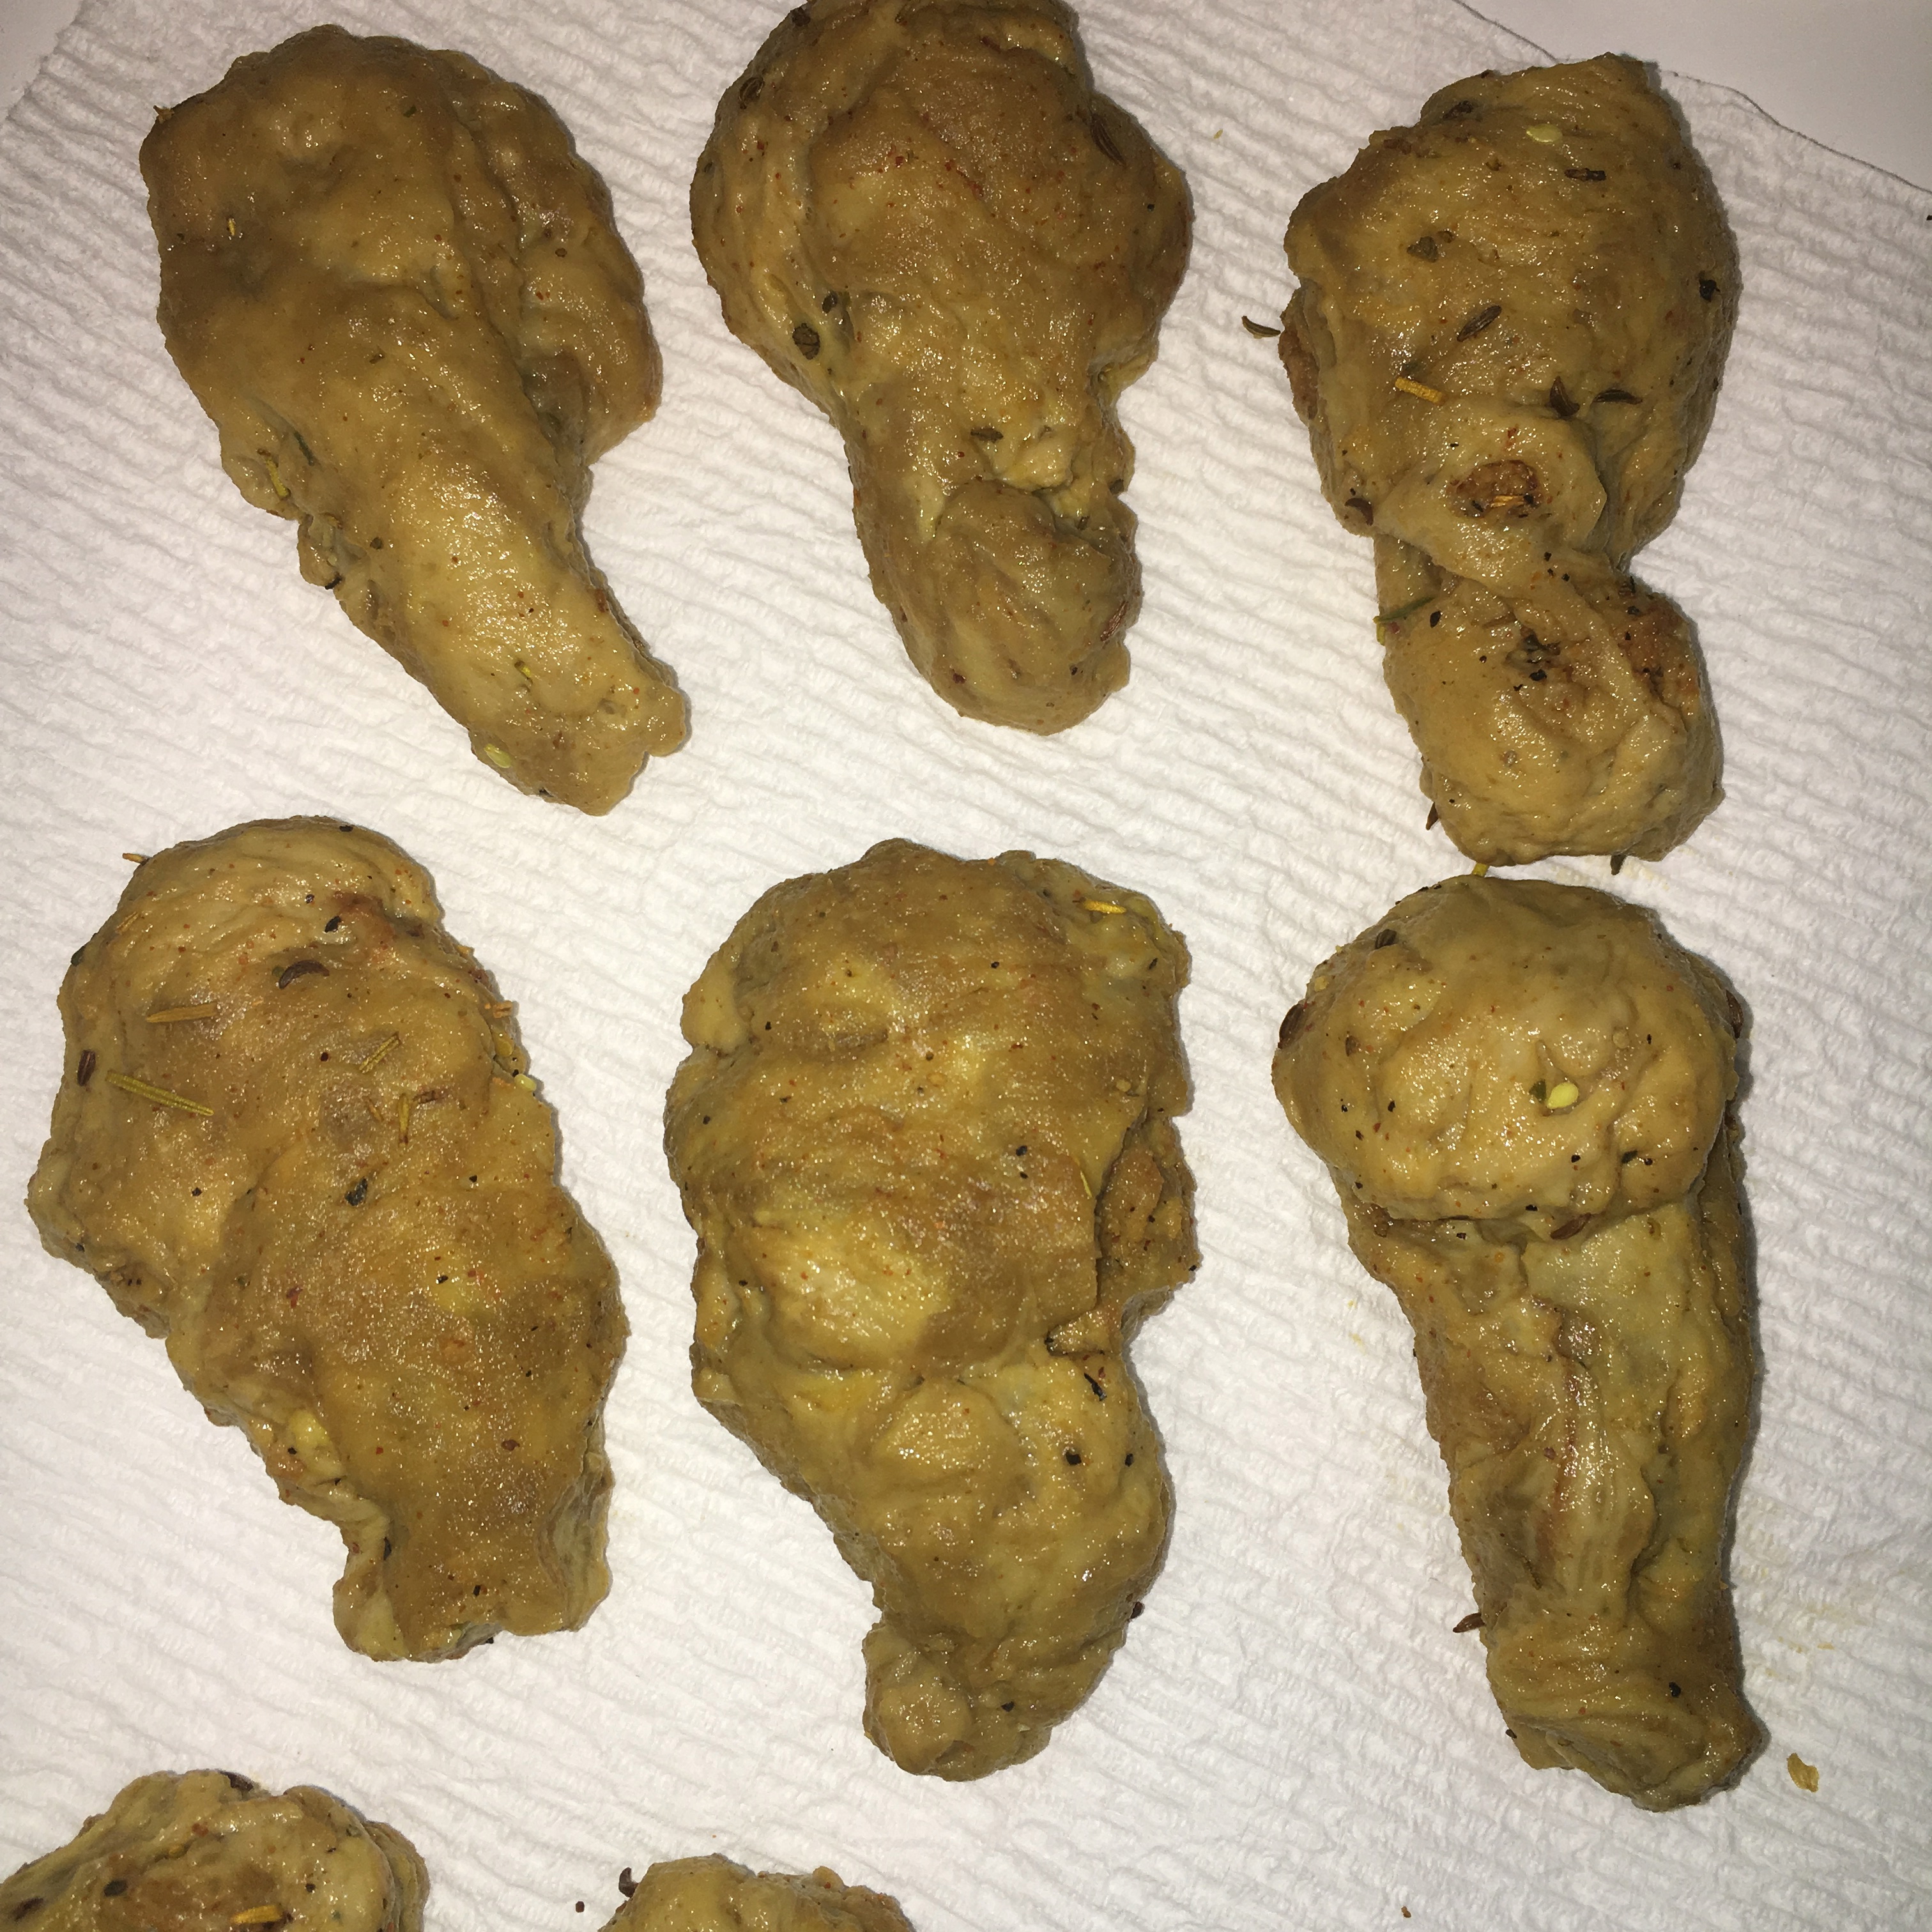 Download Mock Meat Vegan Fried Chicken made from scratch. Here's a great alternative!